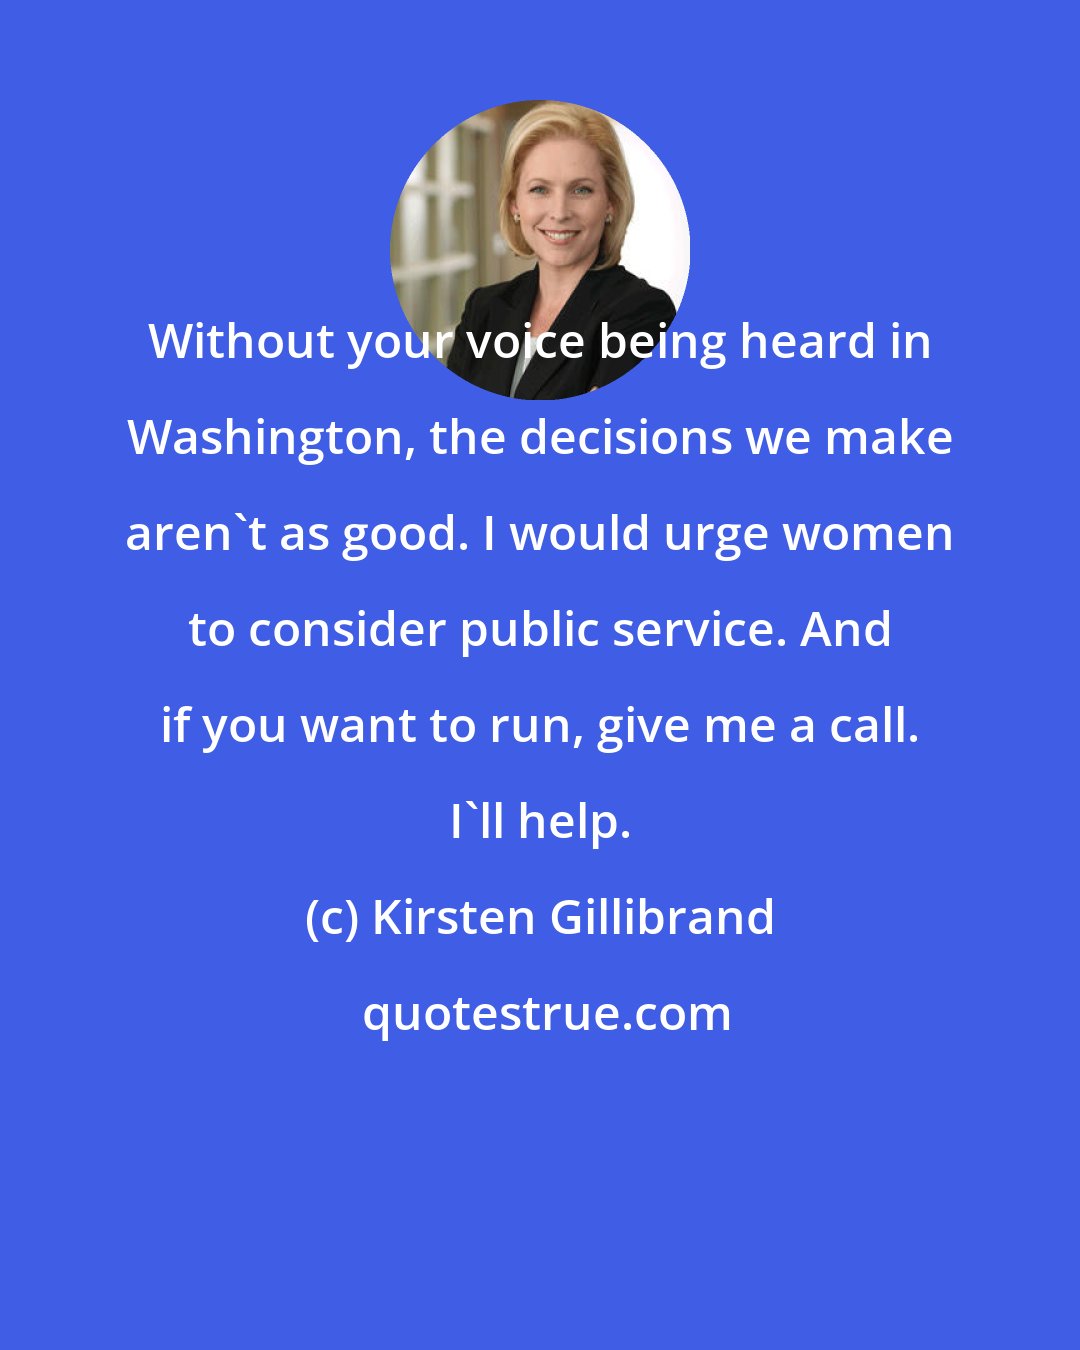 Kirsten Gillibrand: Without your voice being heard in Washington, the decisions we make aren't as good. I would urge women to consider public service. And if you want to run, give me a call. I'll help.